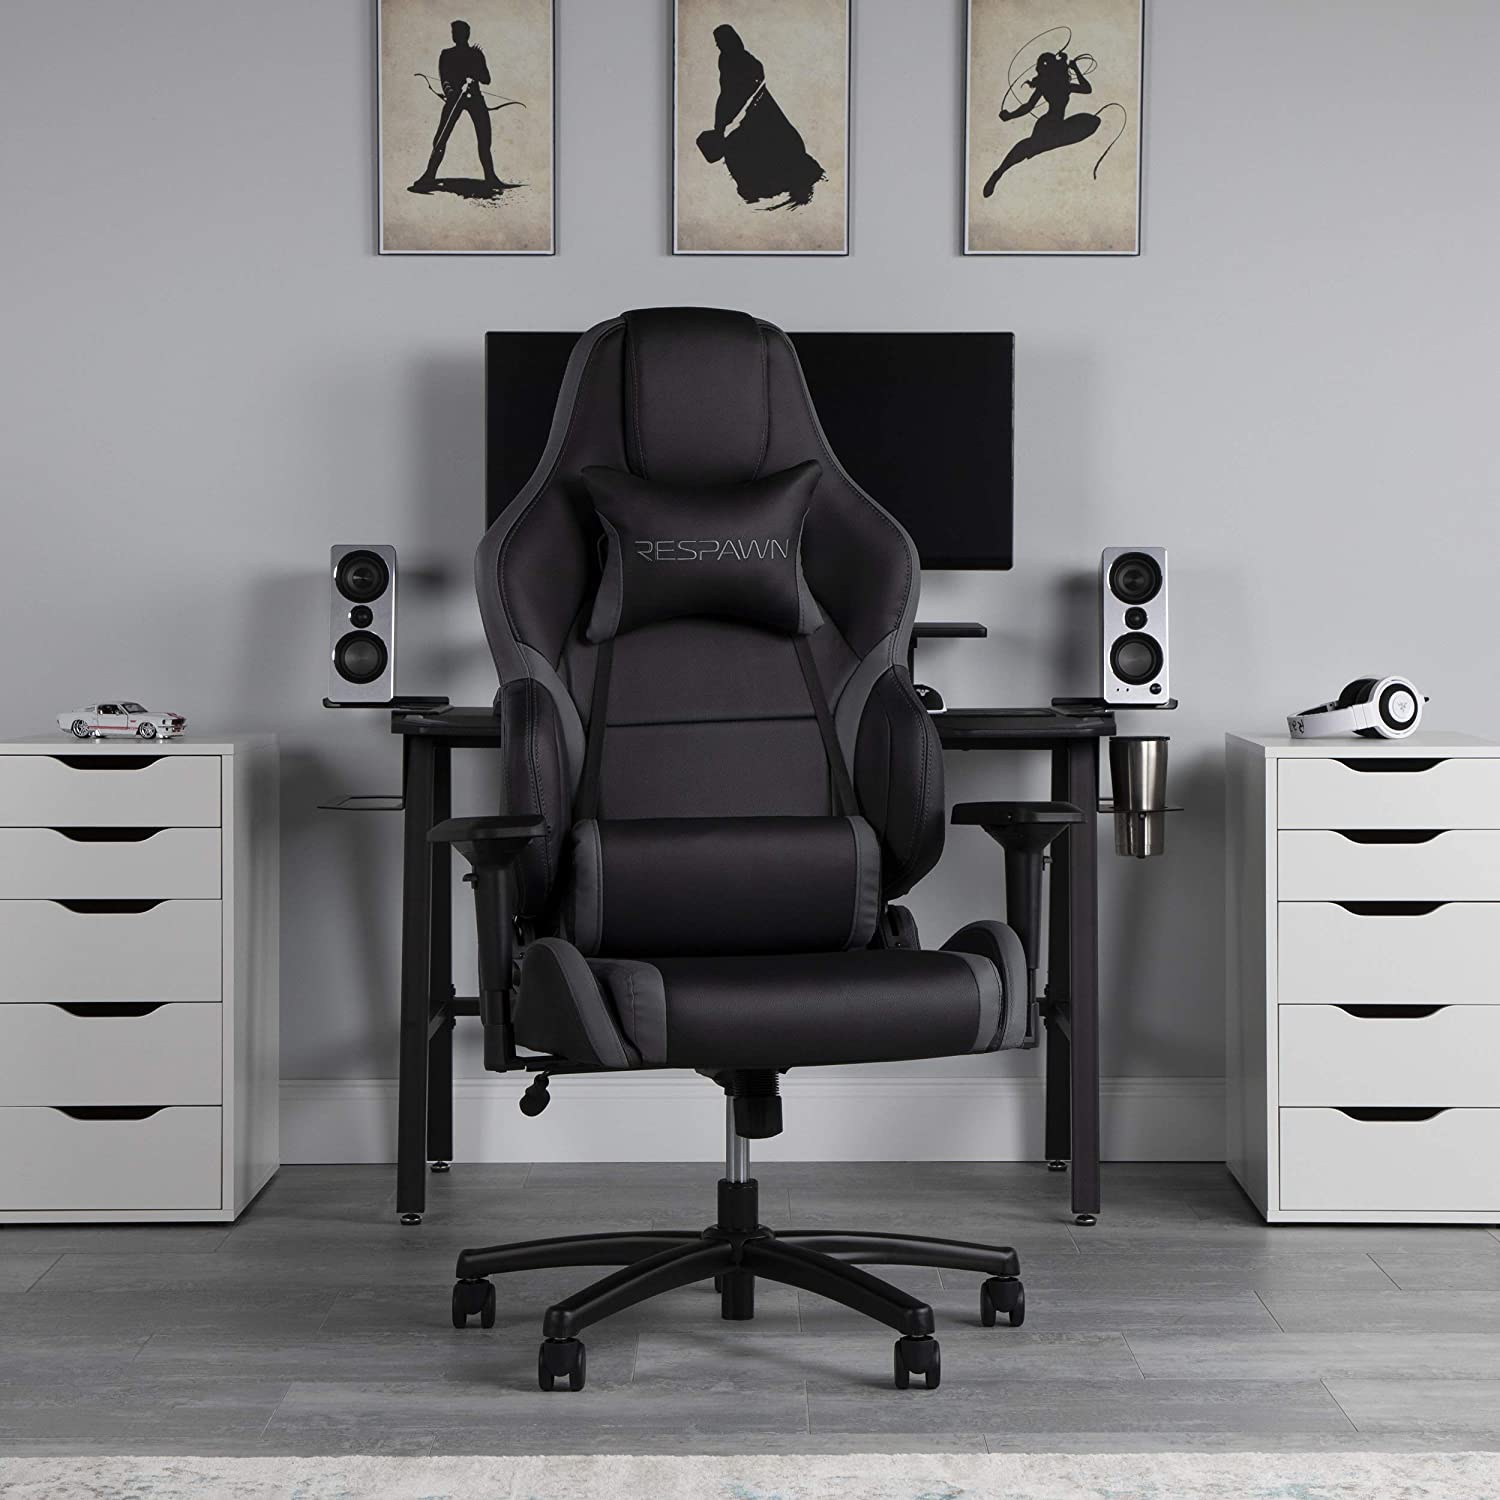 The Best Gaming Chair for Big and Tall People